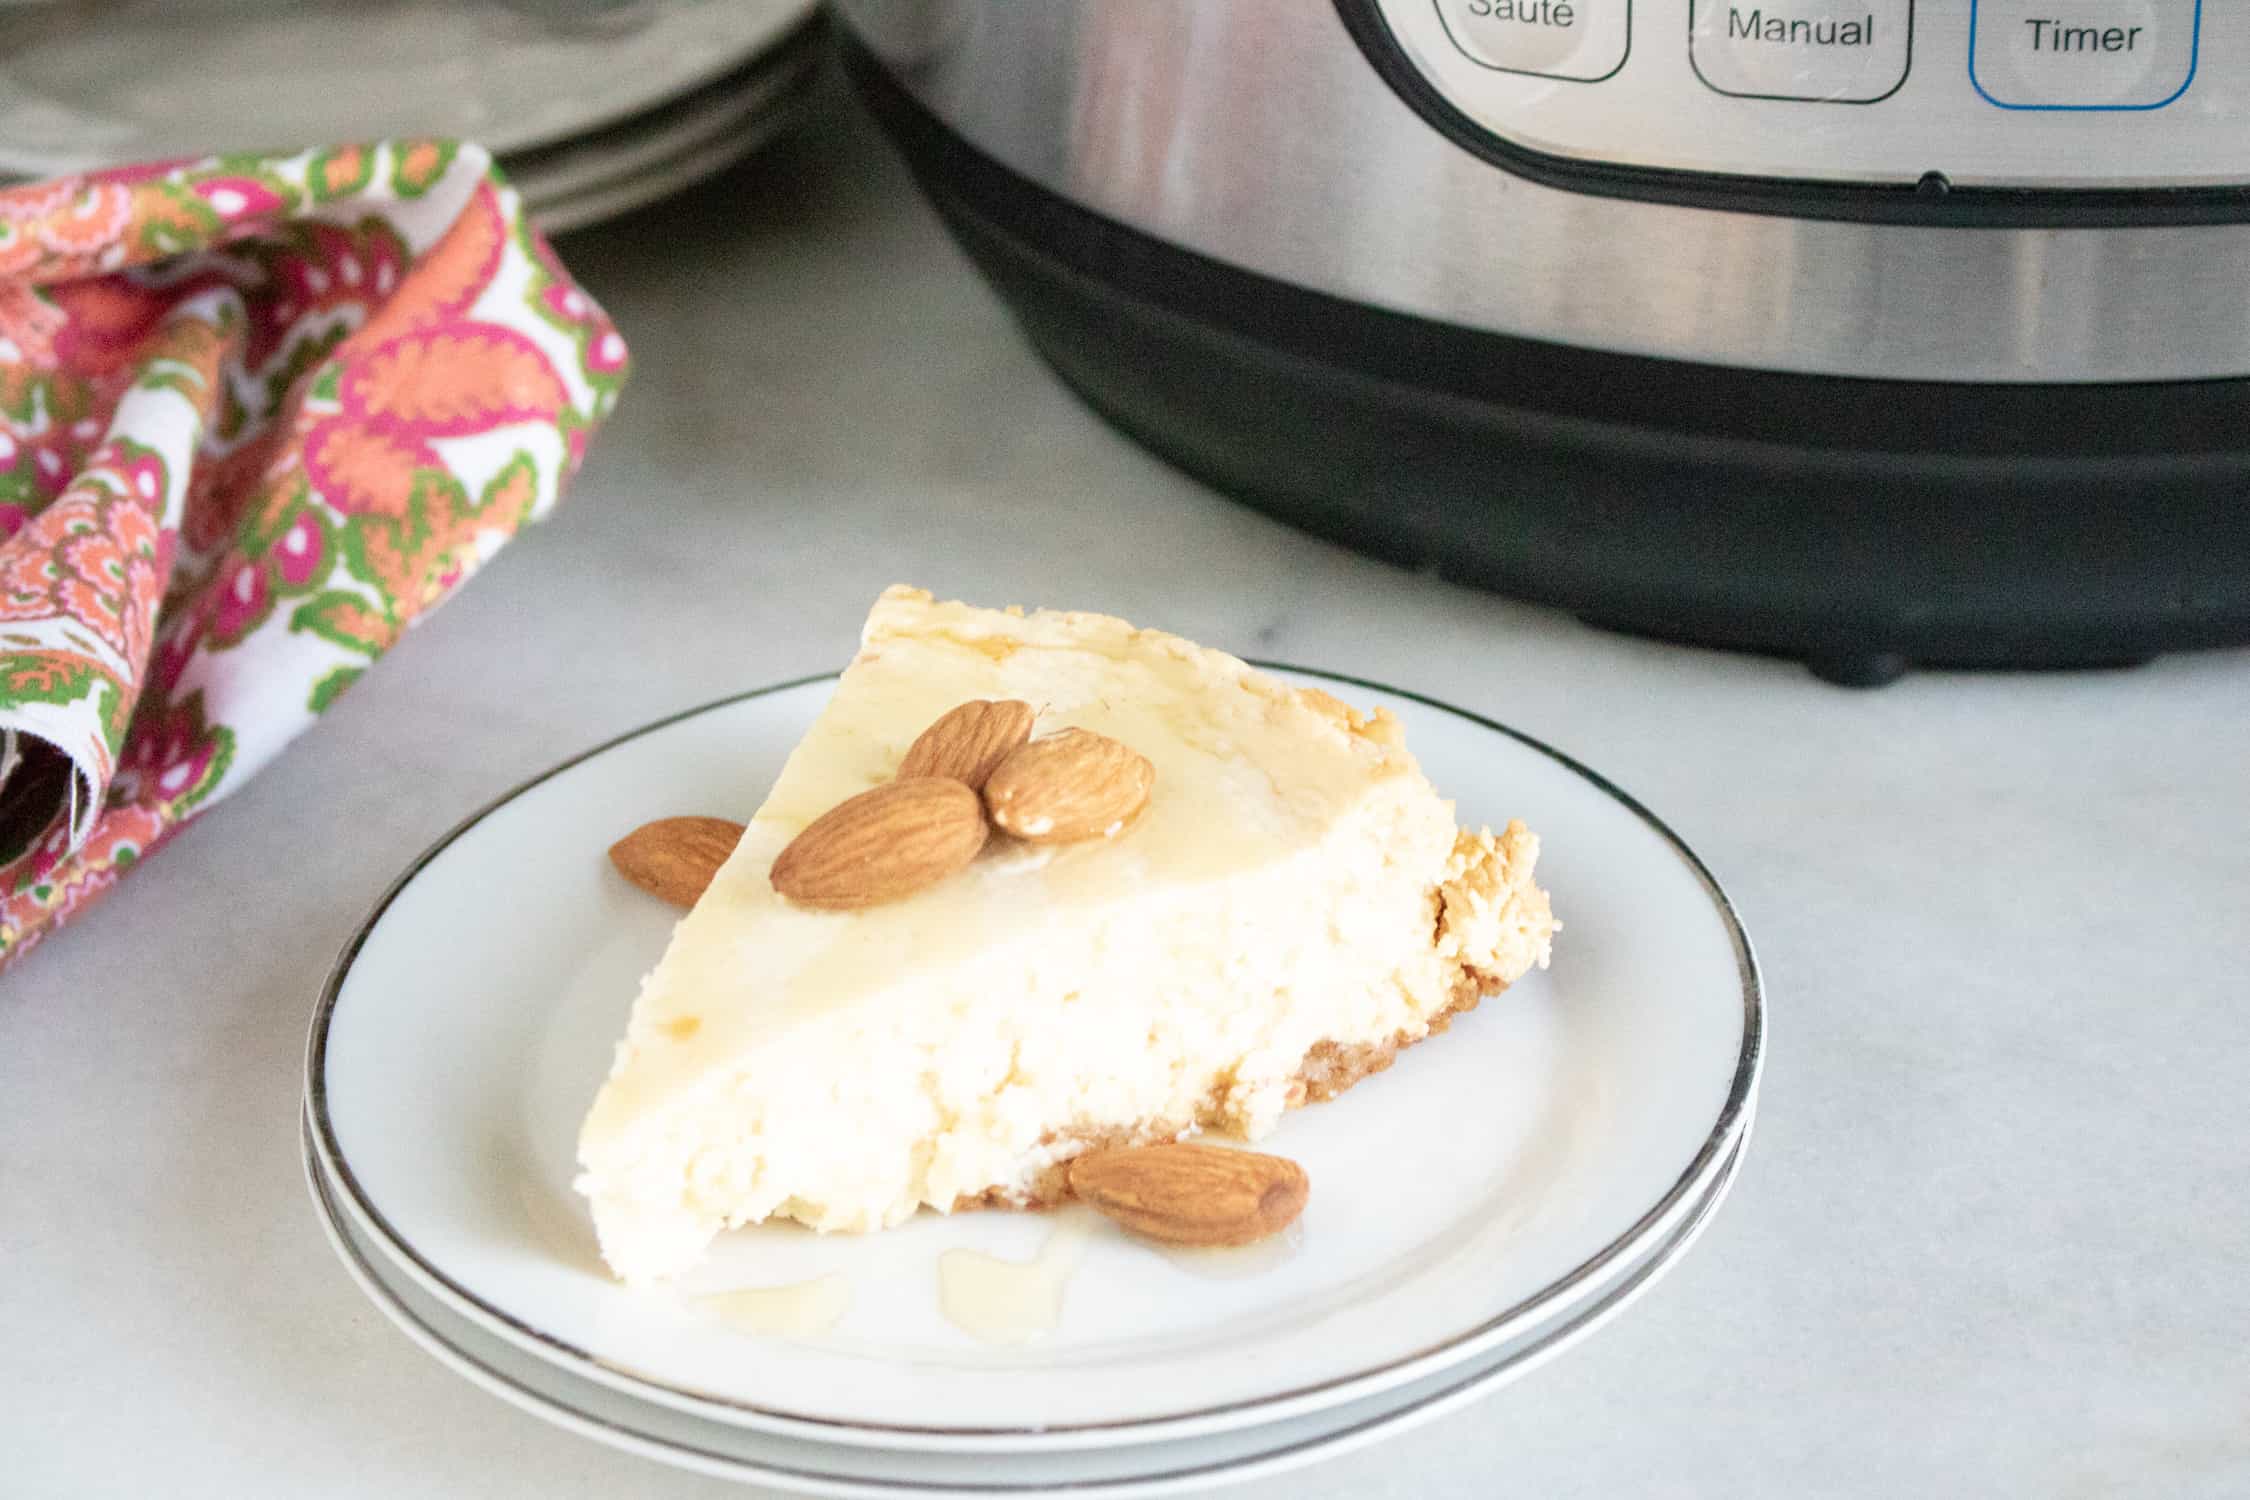 Close-up view of a slice of Instant Pot Grain-free Keto Cheesecake served on a white dessert plate and garnished with almonds